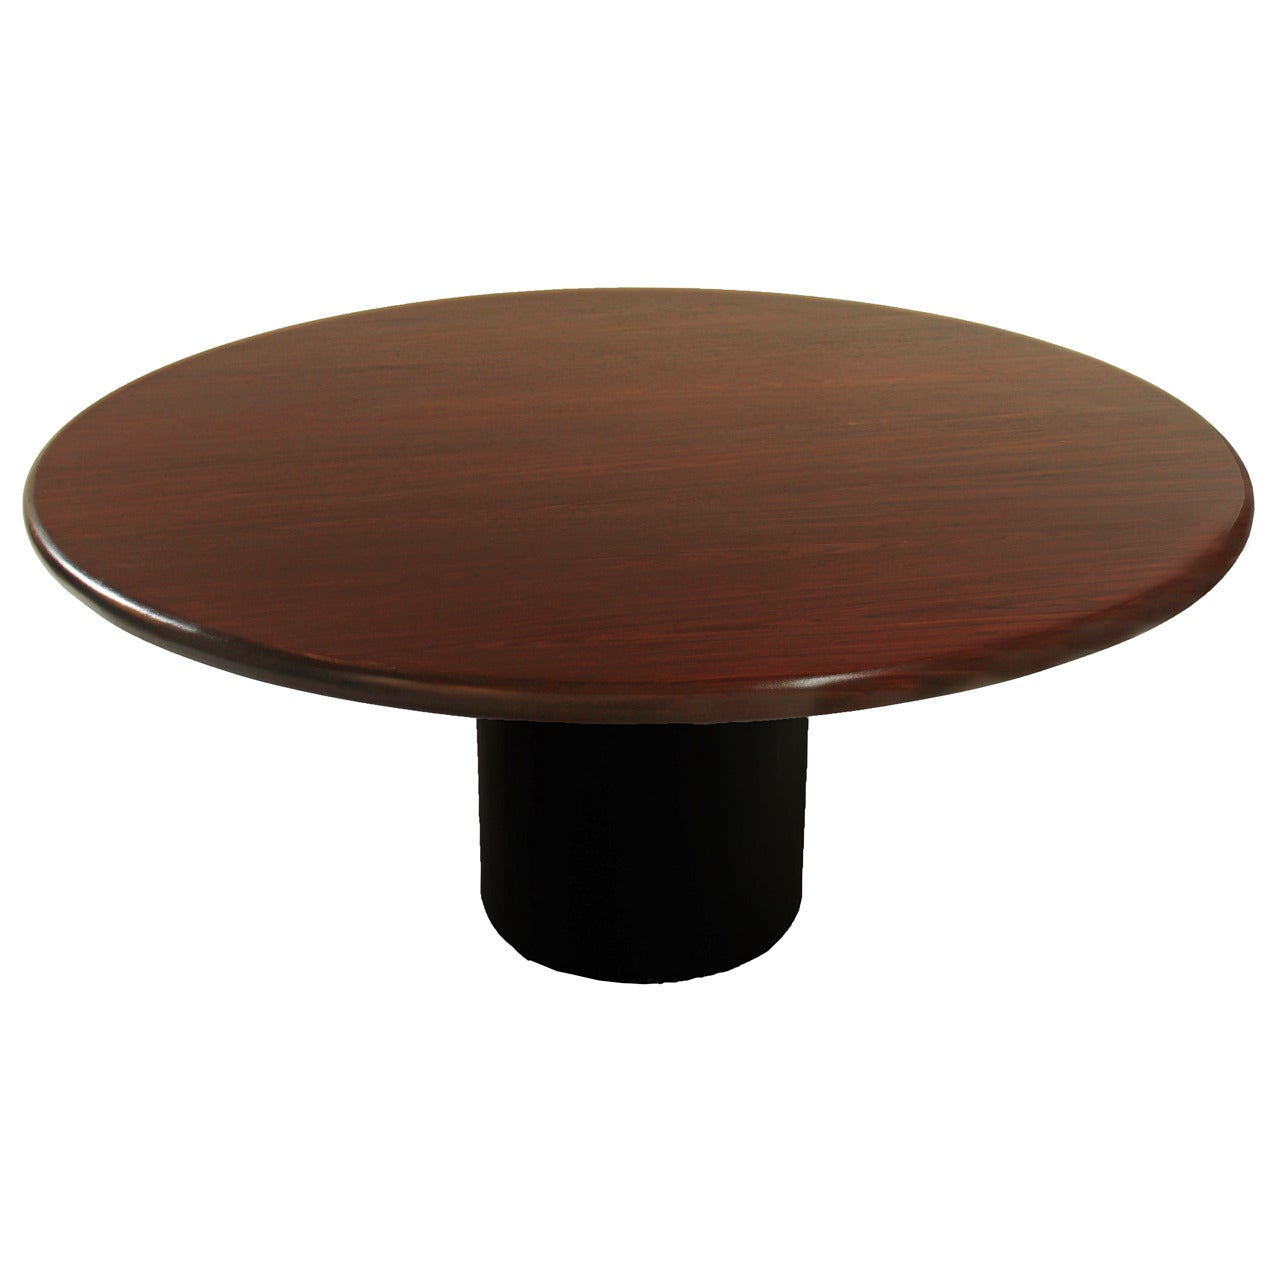 Round Rosewood Dining Table with Leather Base by Jorge Zalszupin